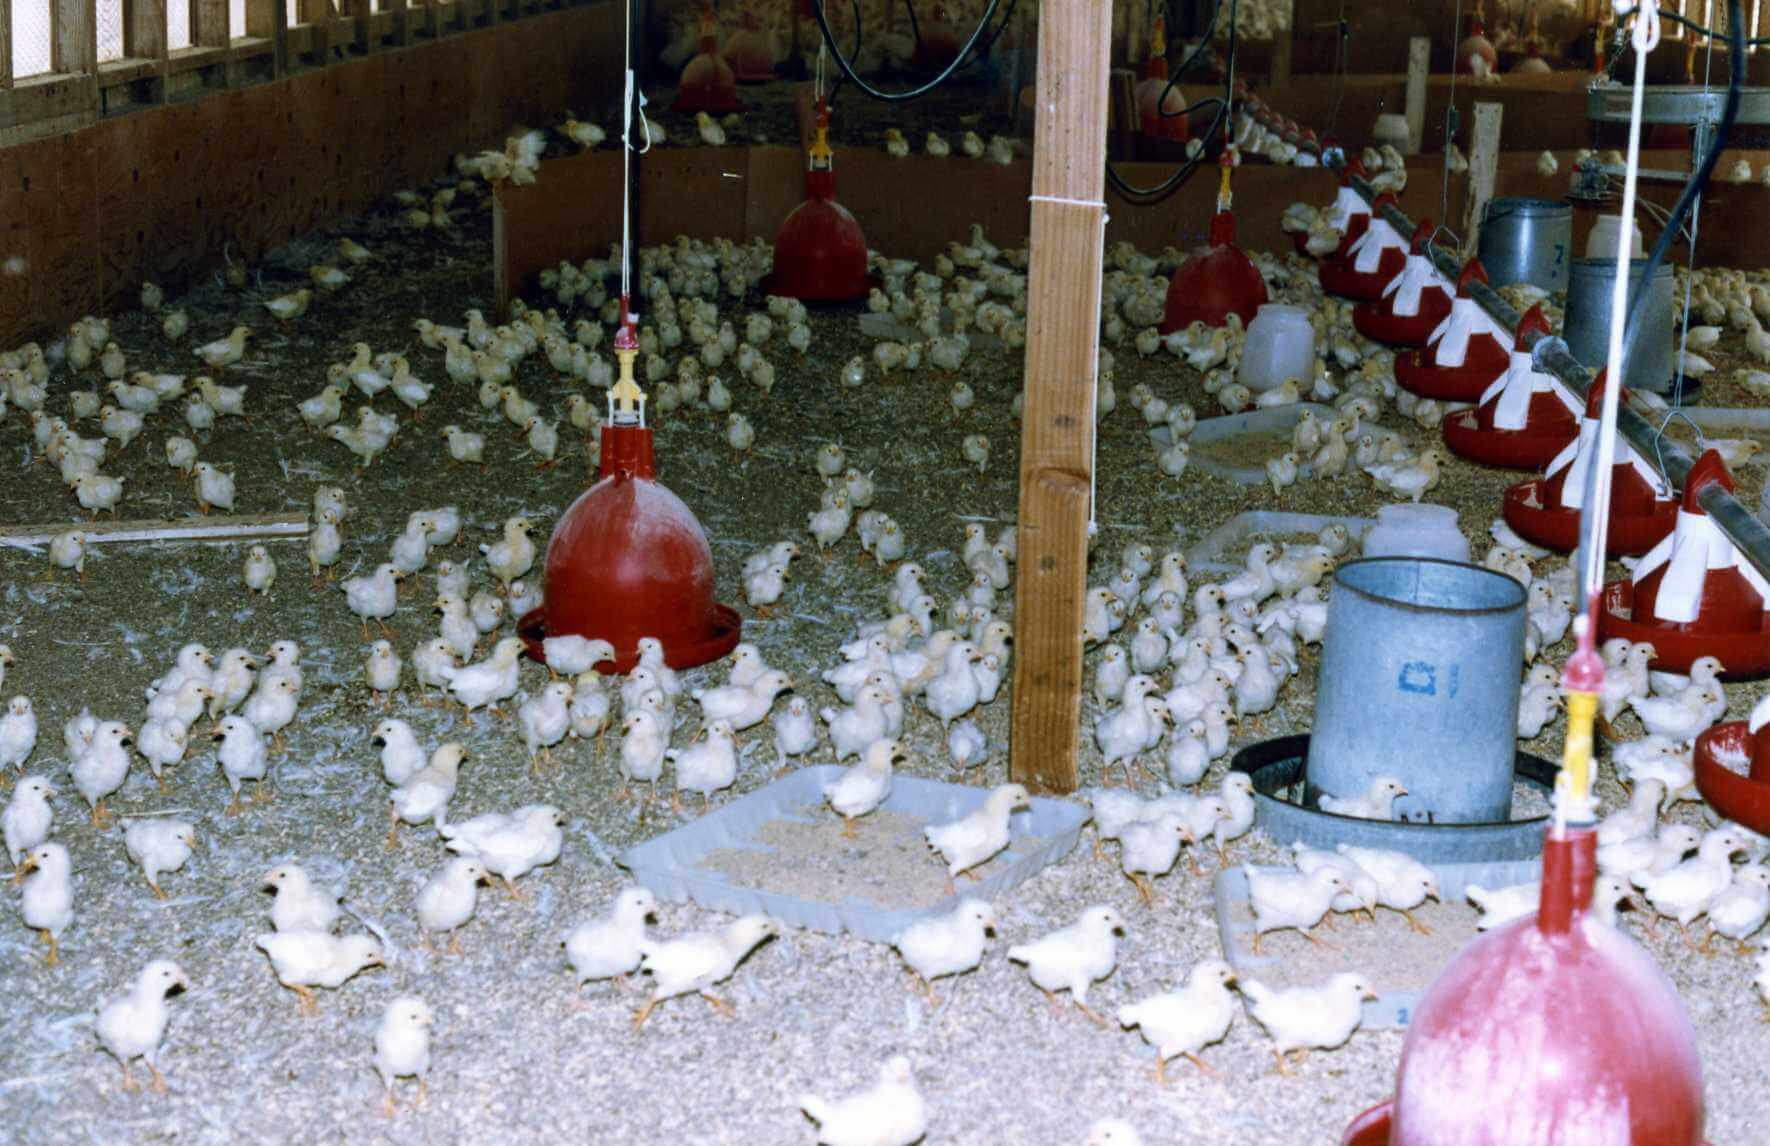 Baby chicks in large room